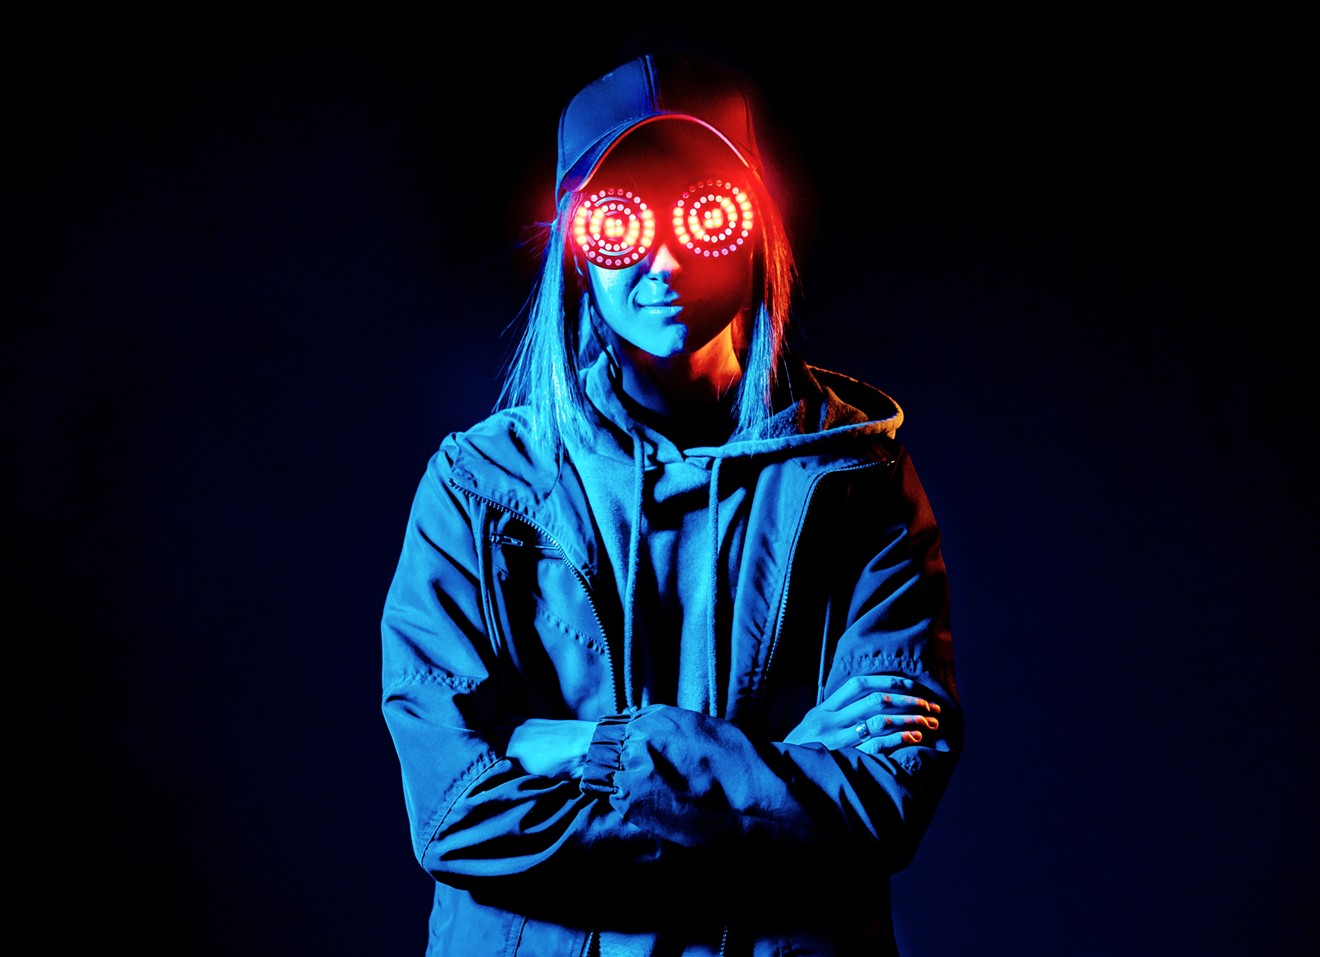 REZZ is scheduled to perform on Saturday, March 14, at Rawhide Event Center in Chandler.